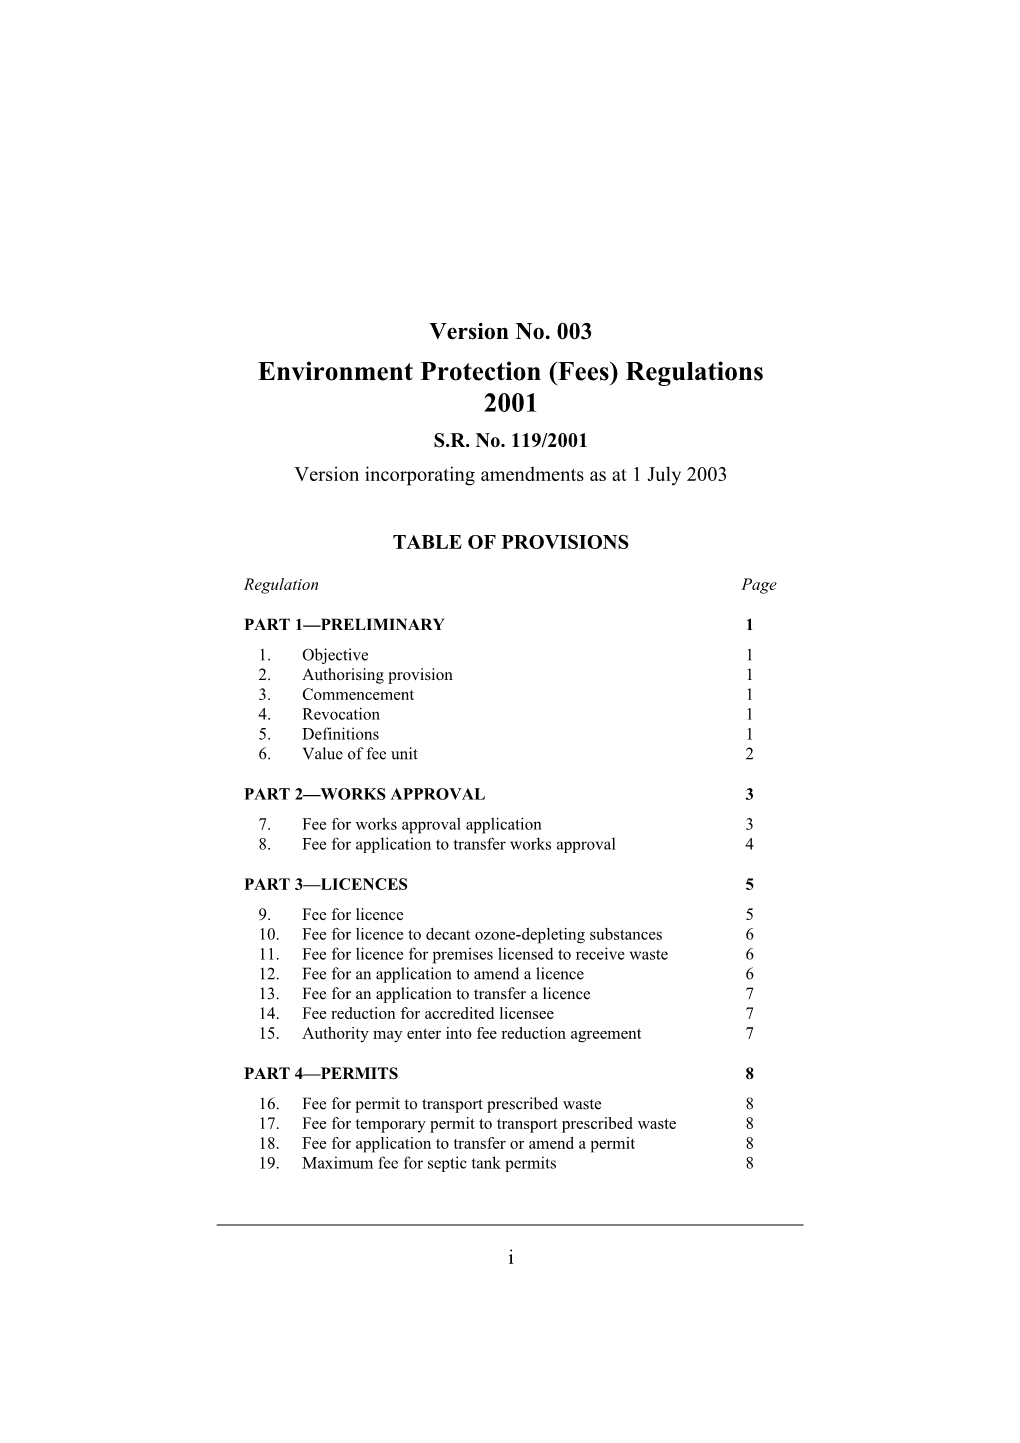 Environment Protection (Fees) Regulations 2001